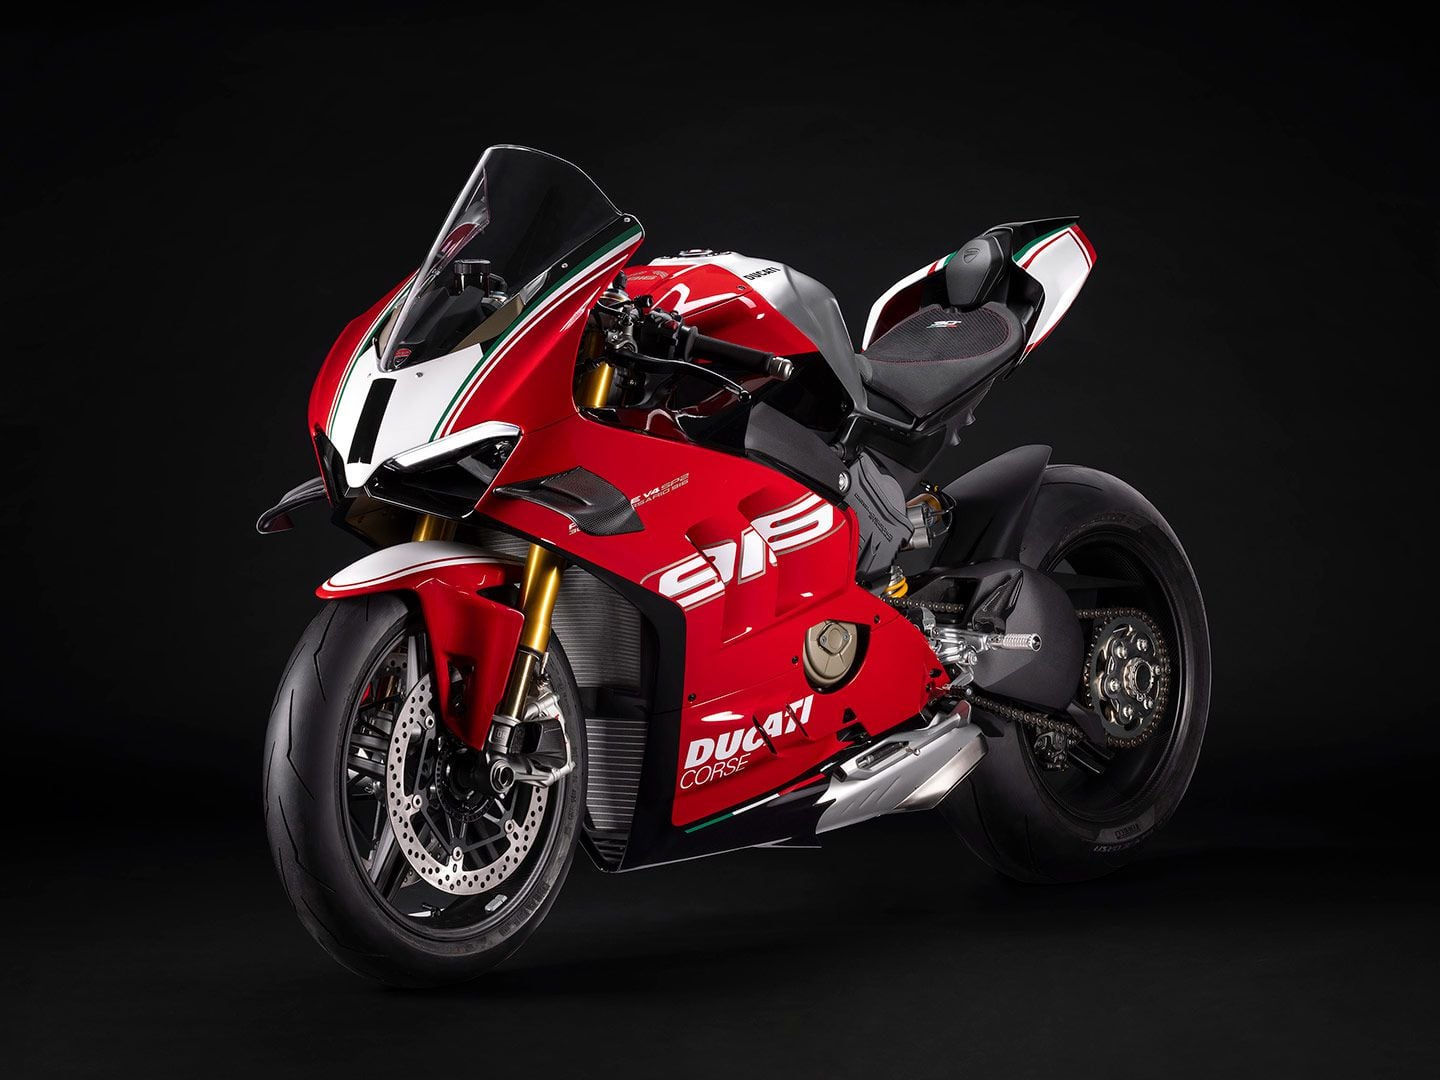 Not that anyone was complaining about the Panigale V4’s looks before, but it’s especially hard to argue with the styling on the 30th Anniversario 916 model.